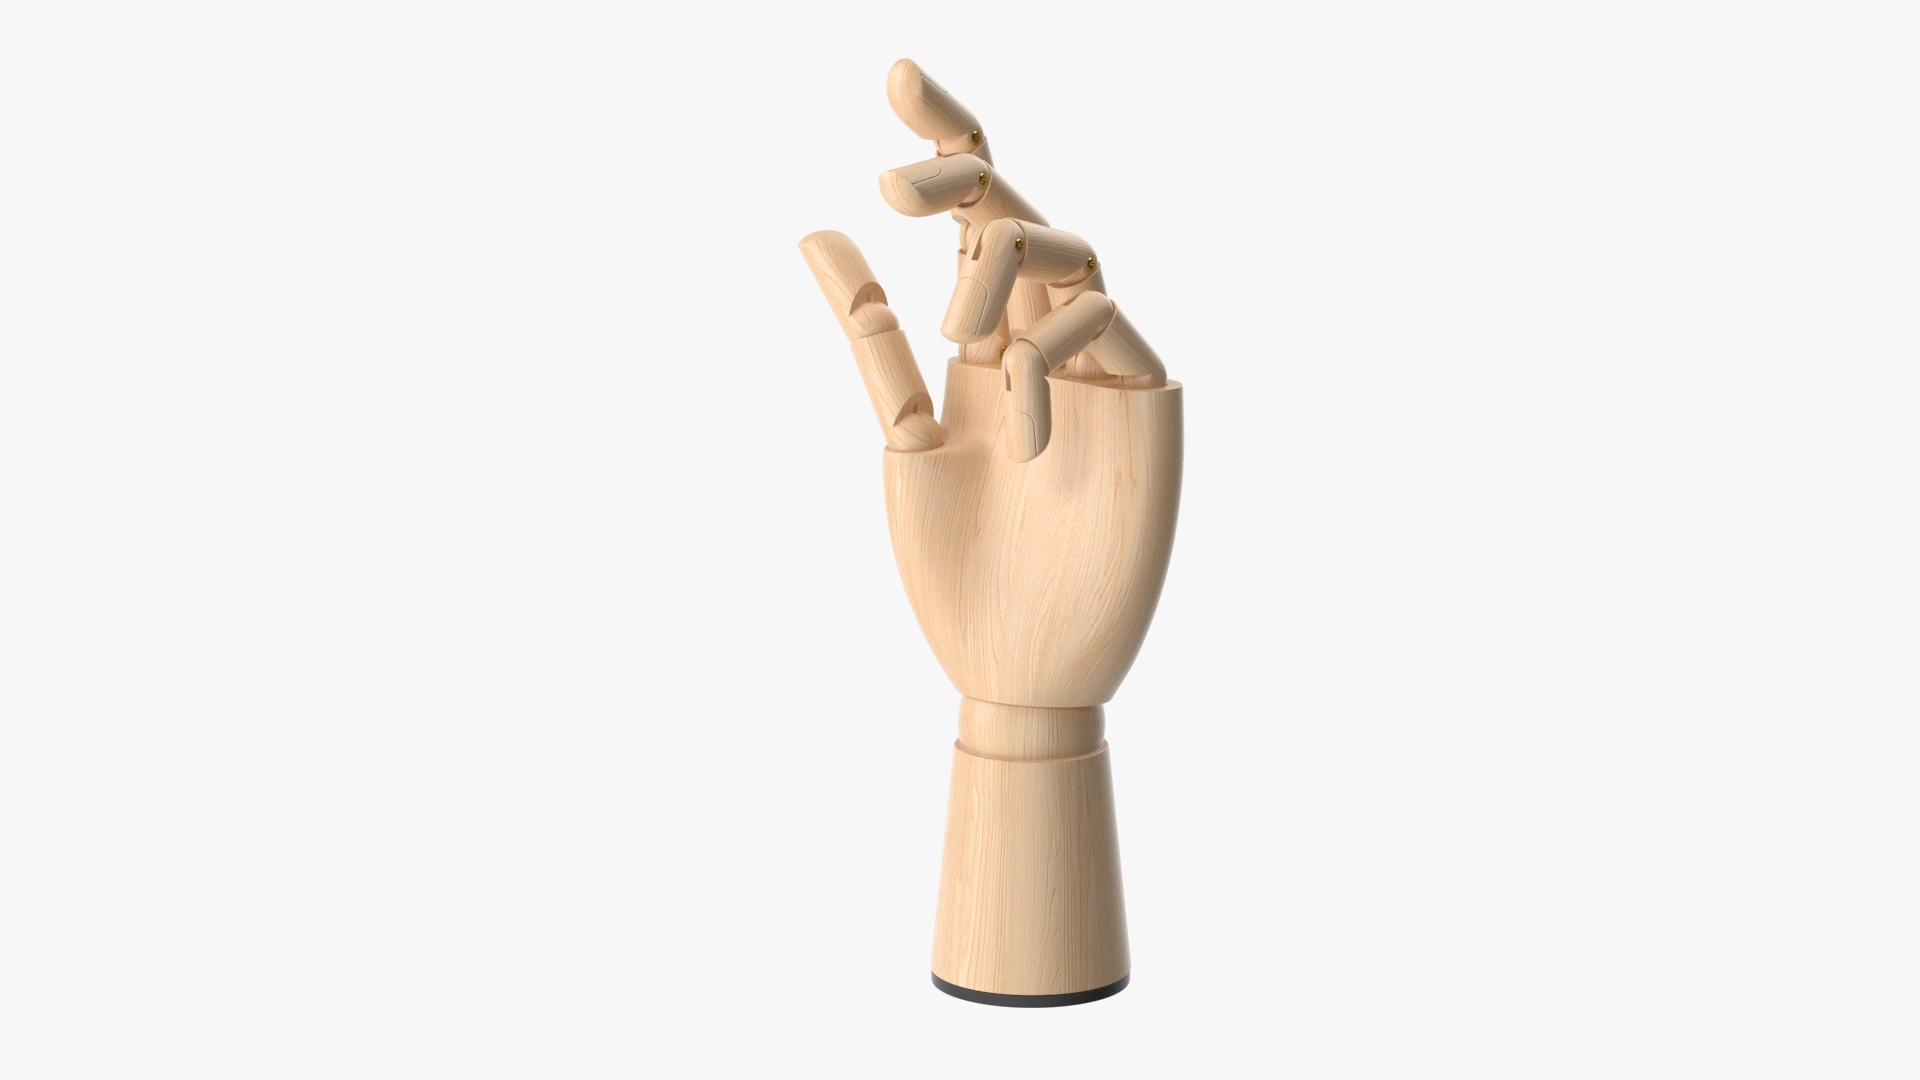 Wooden Mannequin, For Drawing And Character's Pose Reference